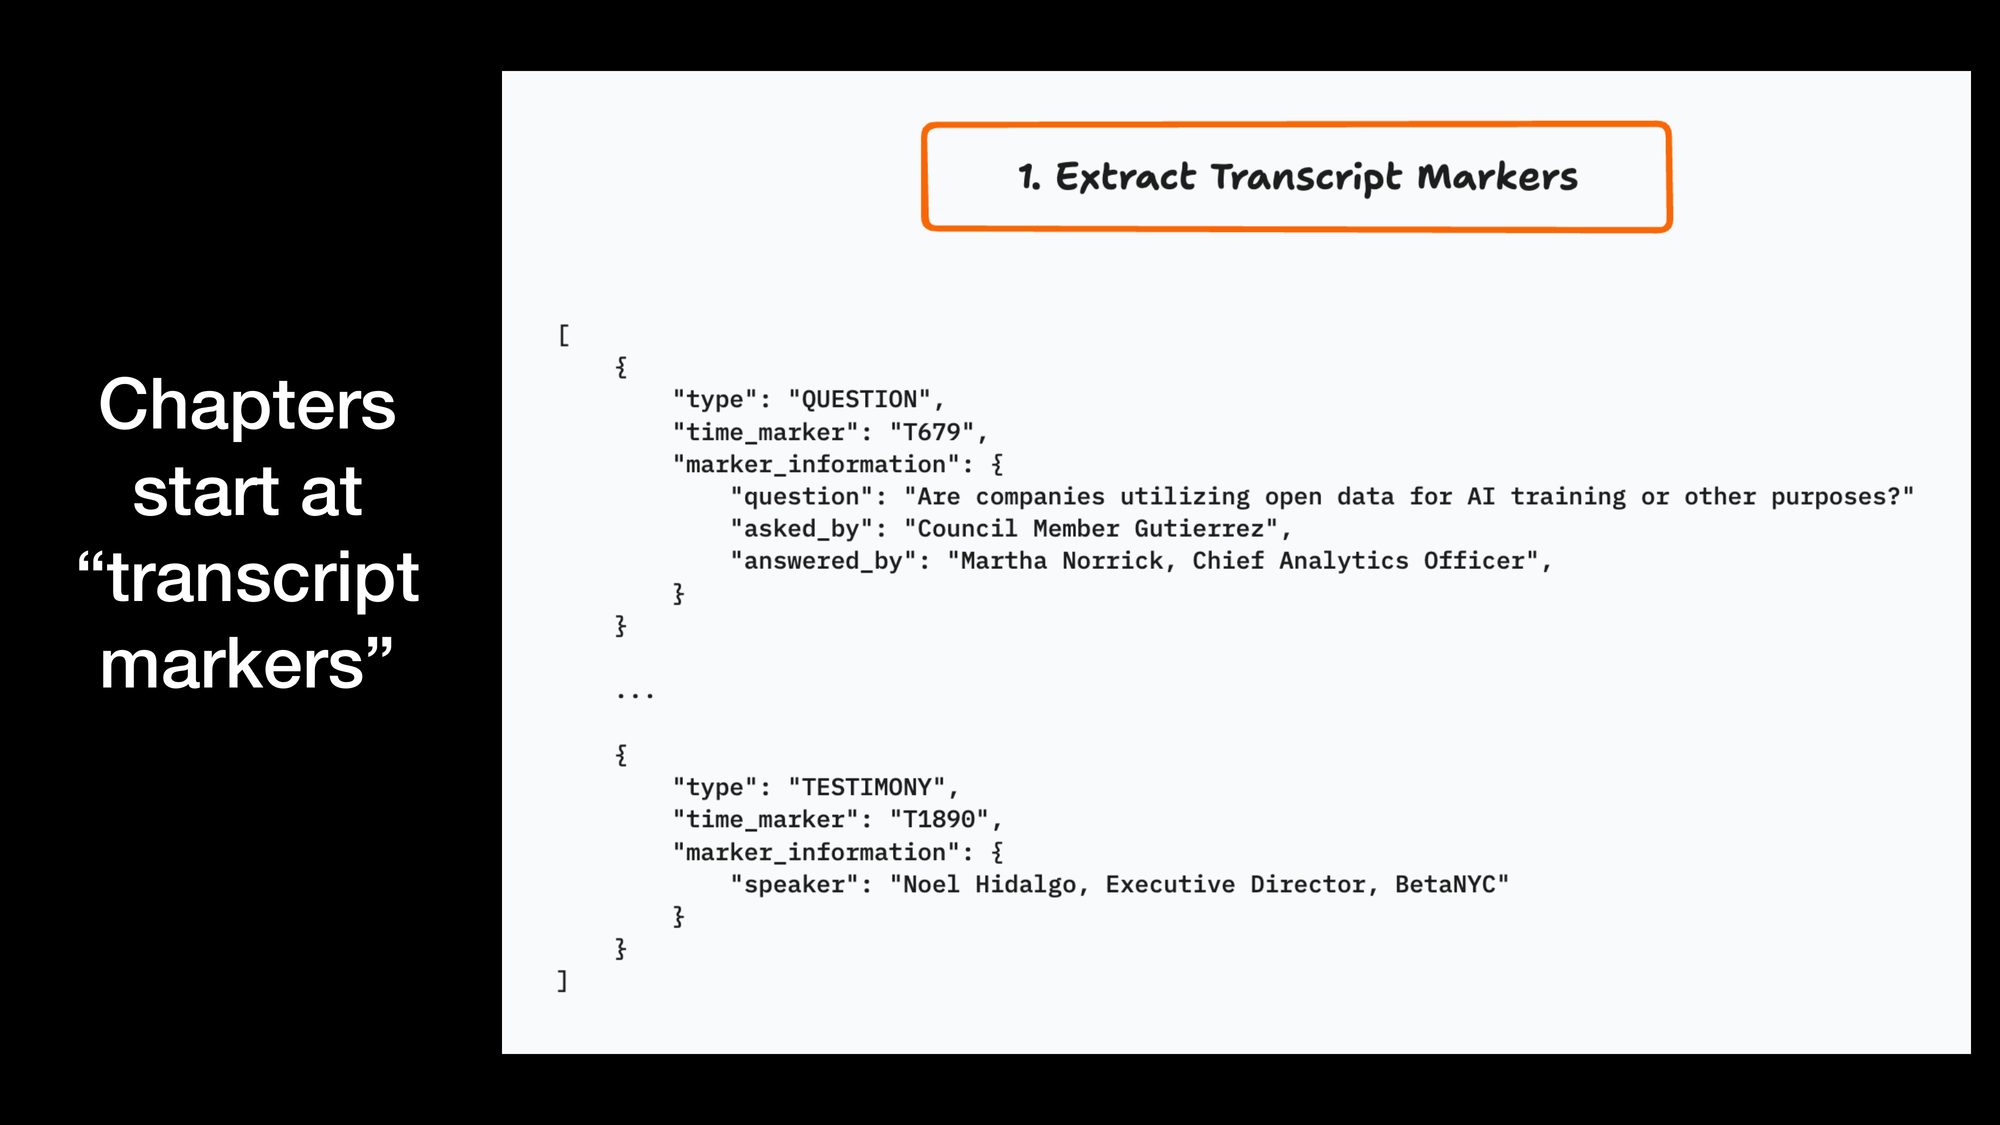 Chapters start at transcript markers. 1. Extract transcript markers. There is a JSON list of JSON objects that have fields: type, time_marker, and marker_information.